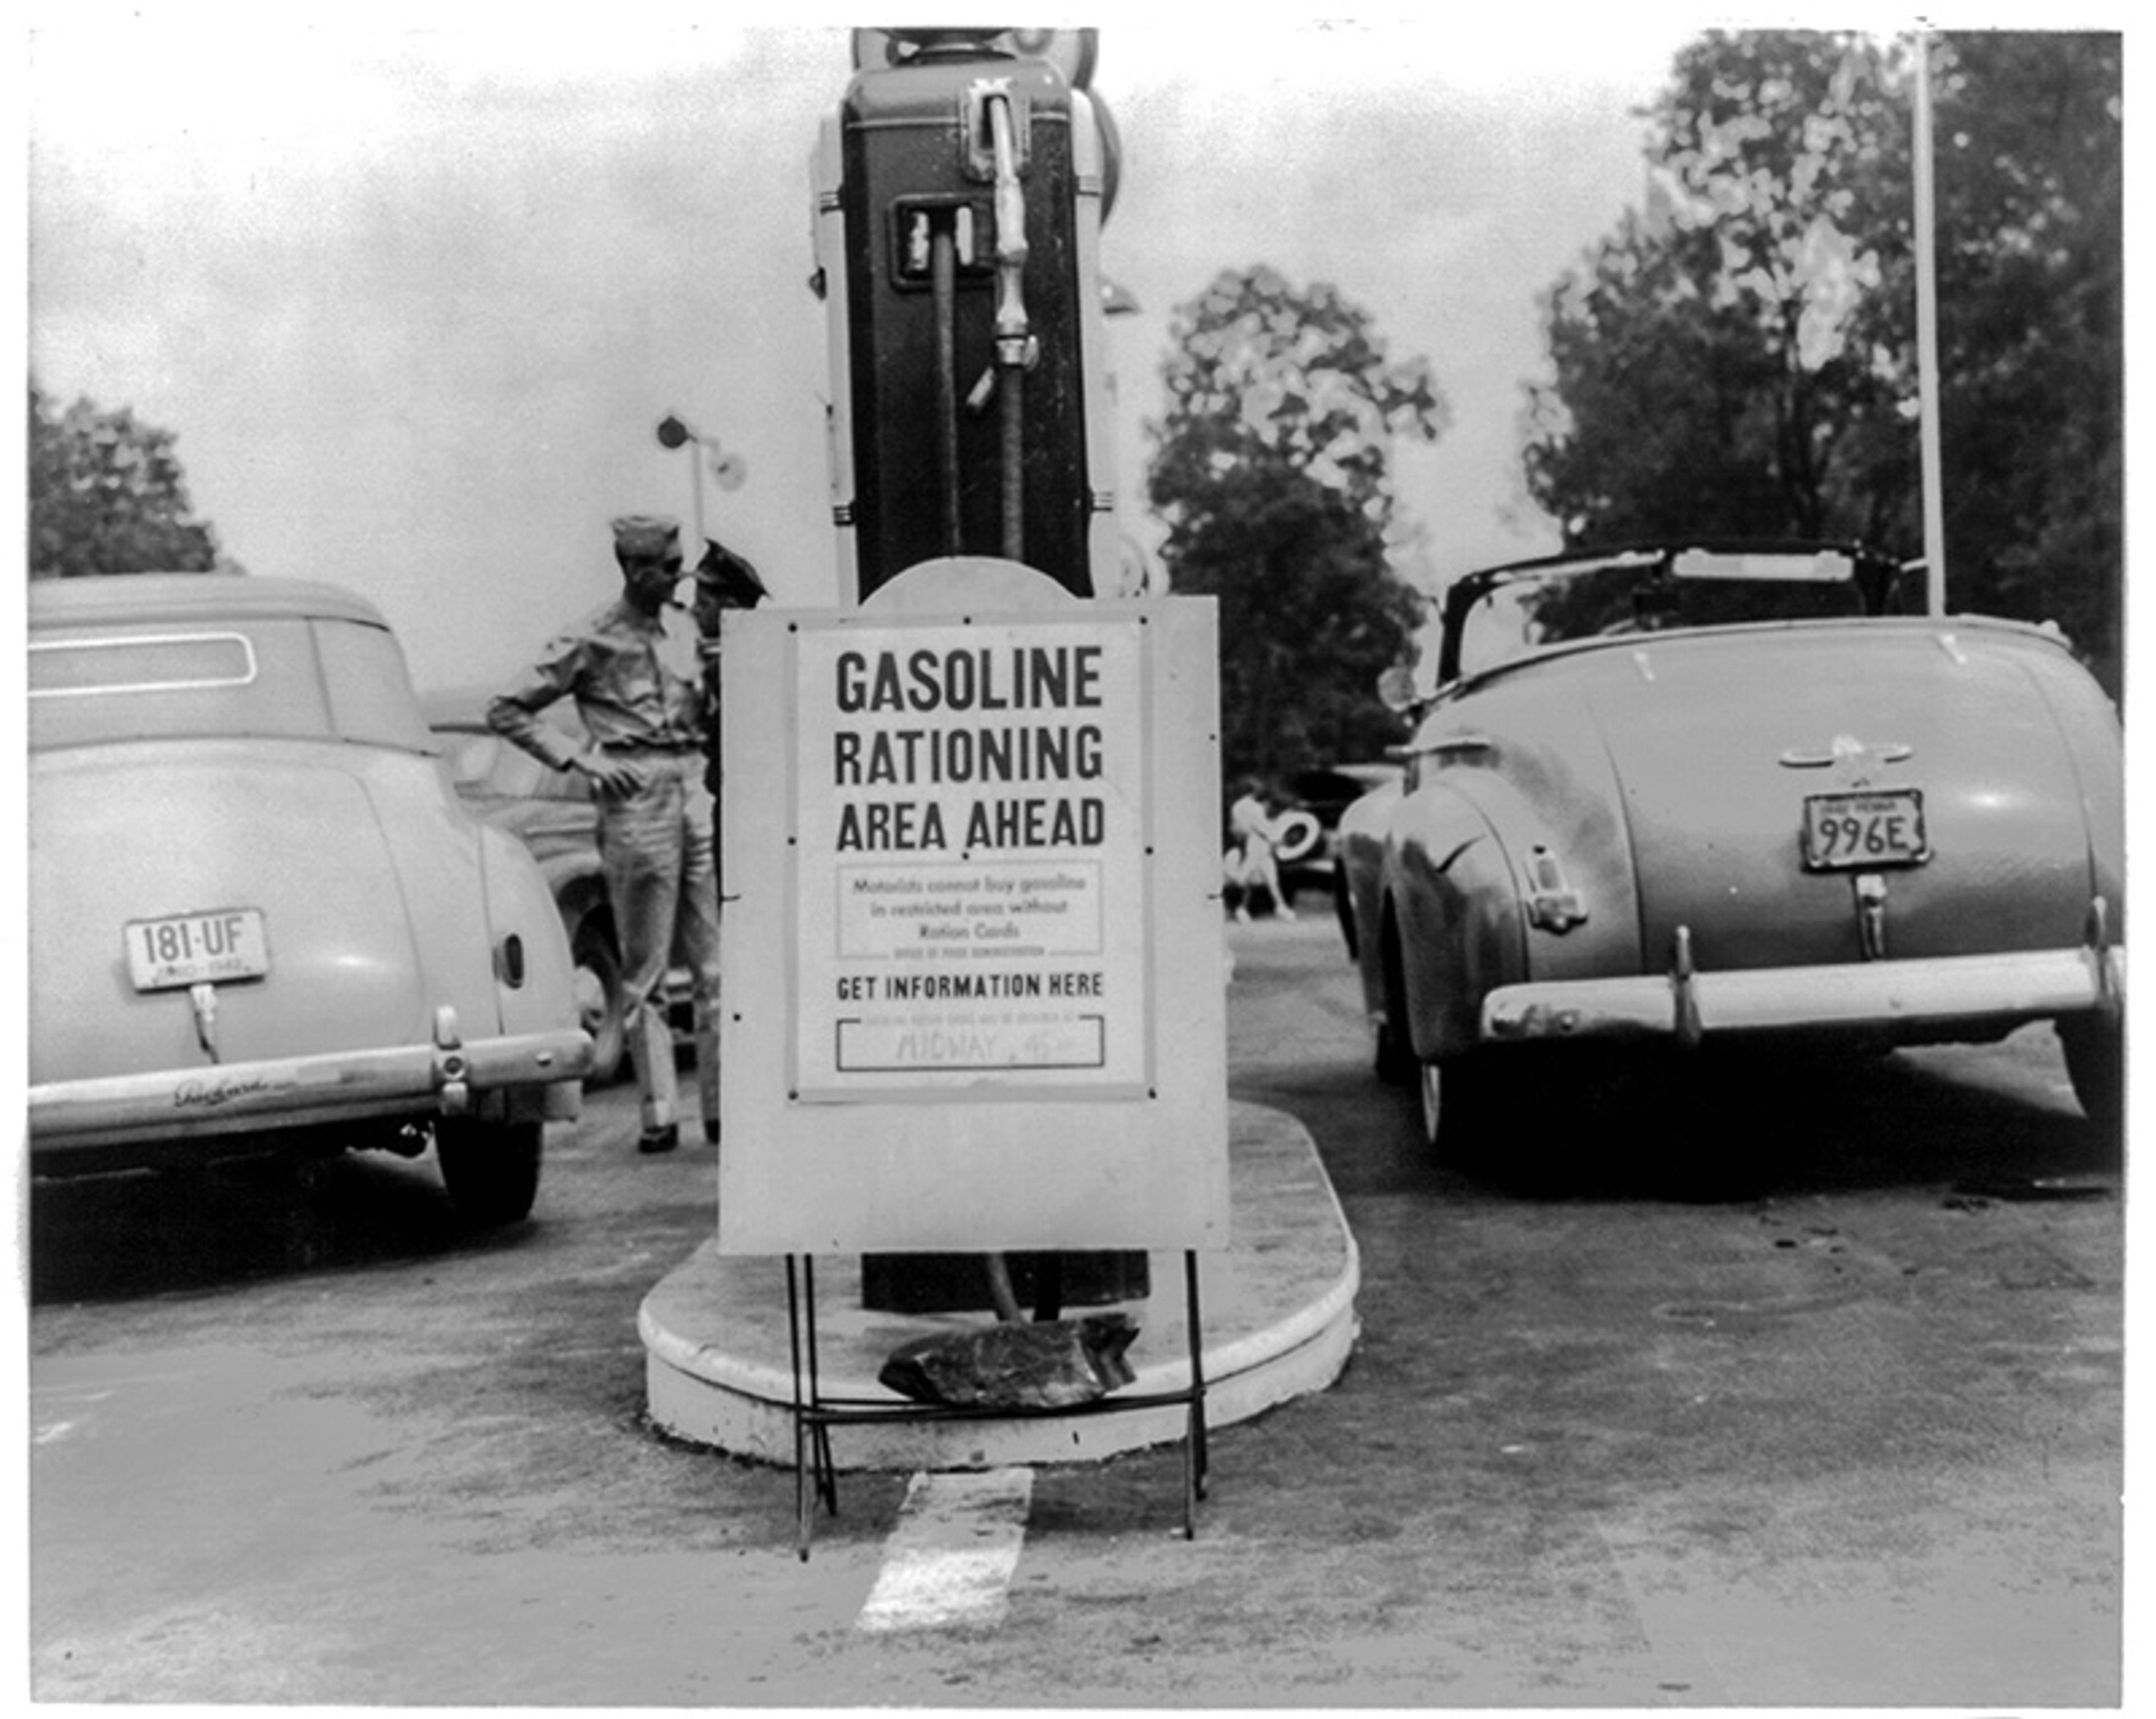 A black-and-white image showing a sign reading “Gasoline Rationing Area Ahead” with a petrol pump in the background. Two vintage cars are seen parked on either side of the sign, with a person in military uniform standing near the pump. Trees are visible in the background.